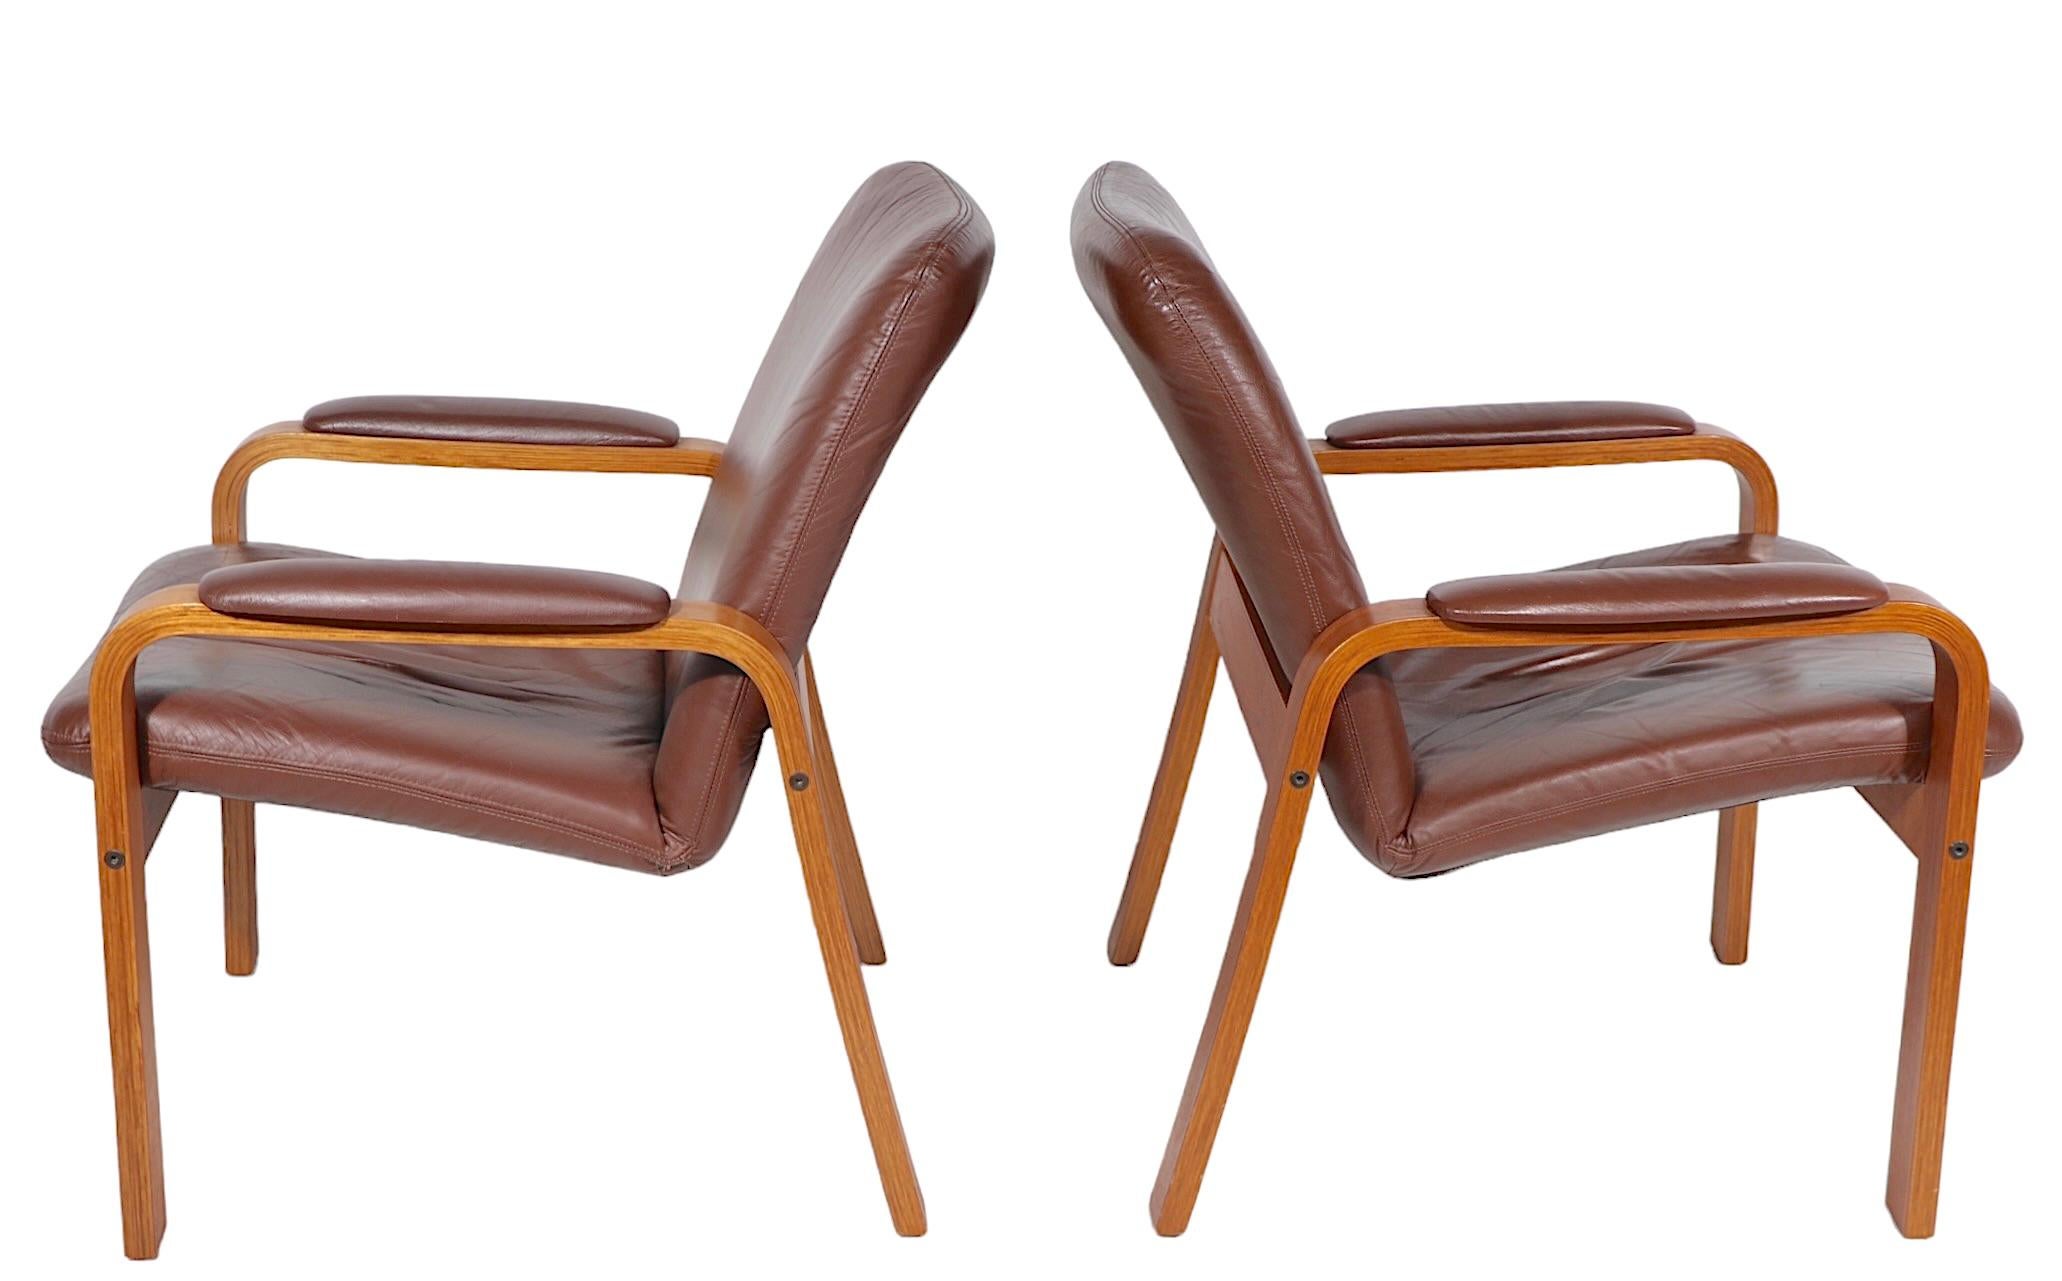 20th Century Pr. Scandinavian Mid Century Modern Lounge Arm Chairs Made in Norway by Ekorness For Sale